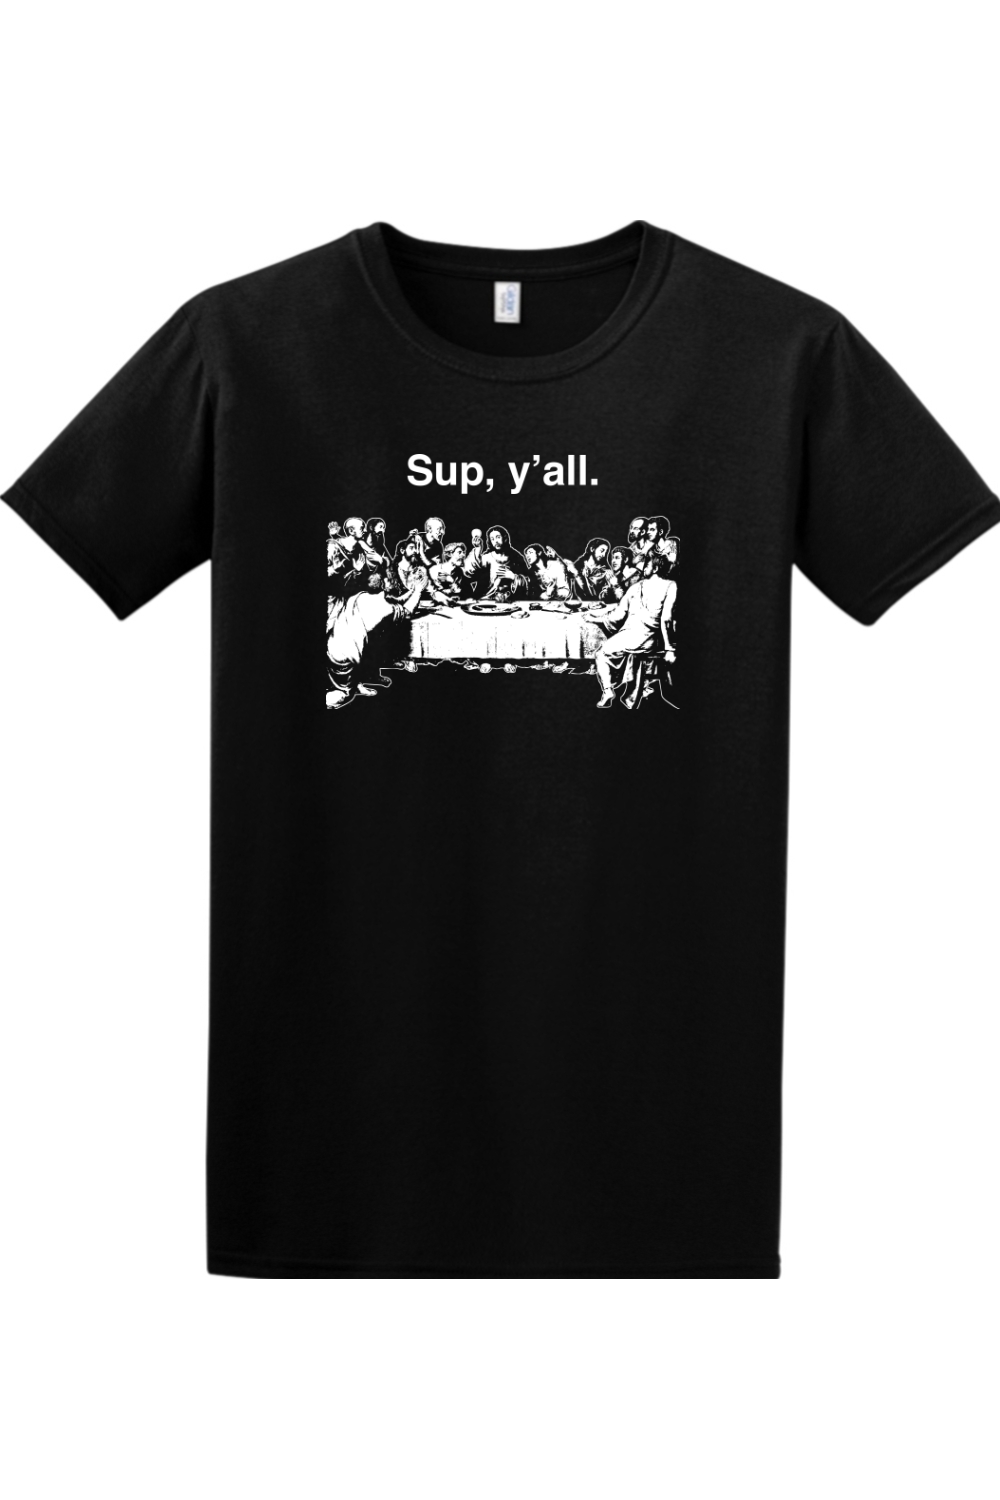 Sup y'all - Last Supper Adult T-Shirt